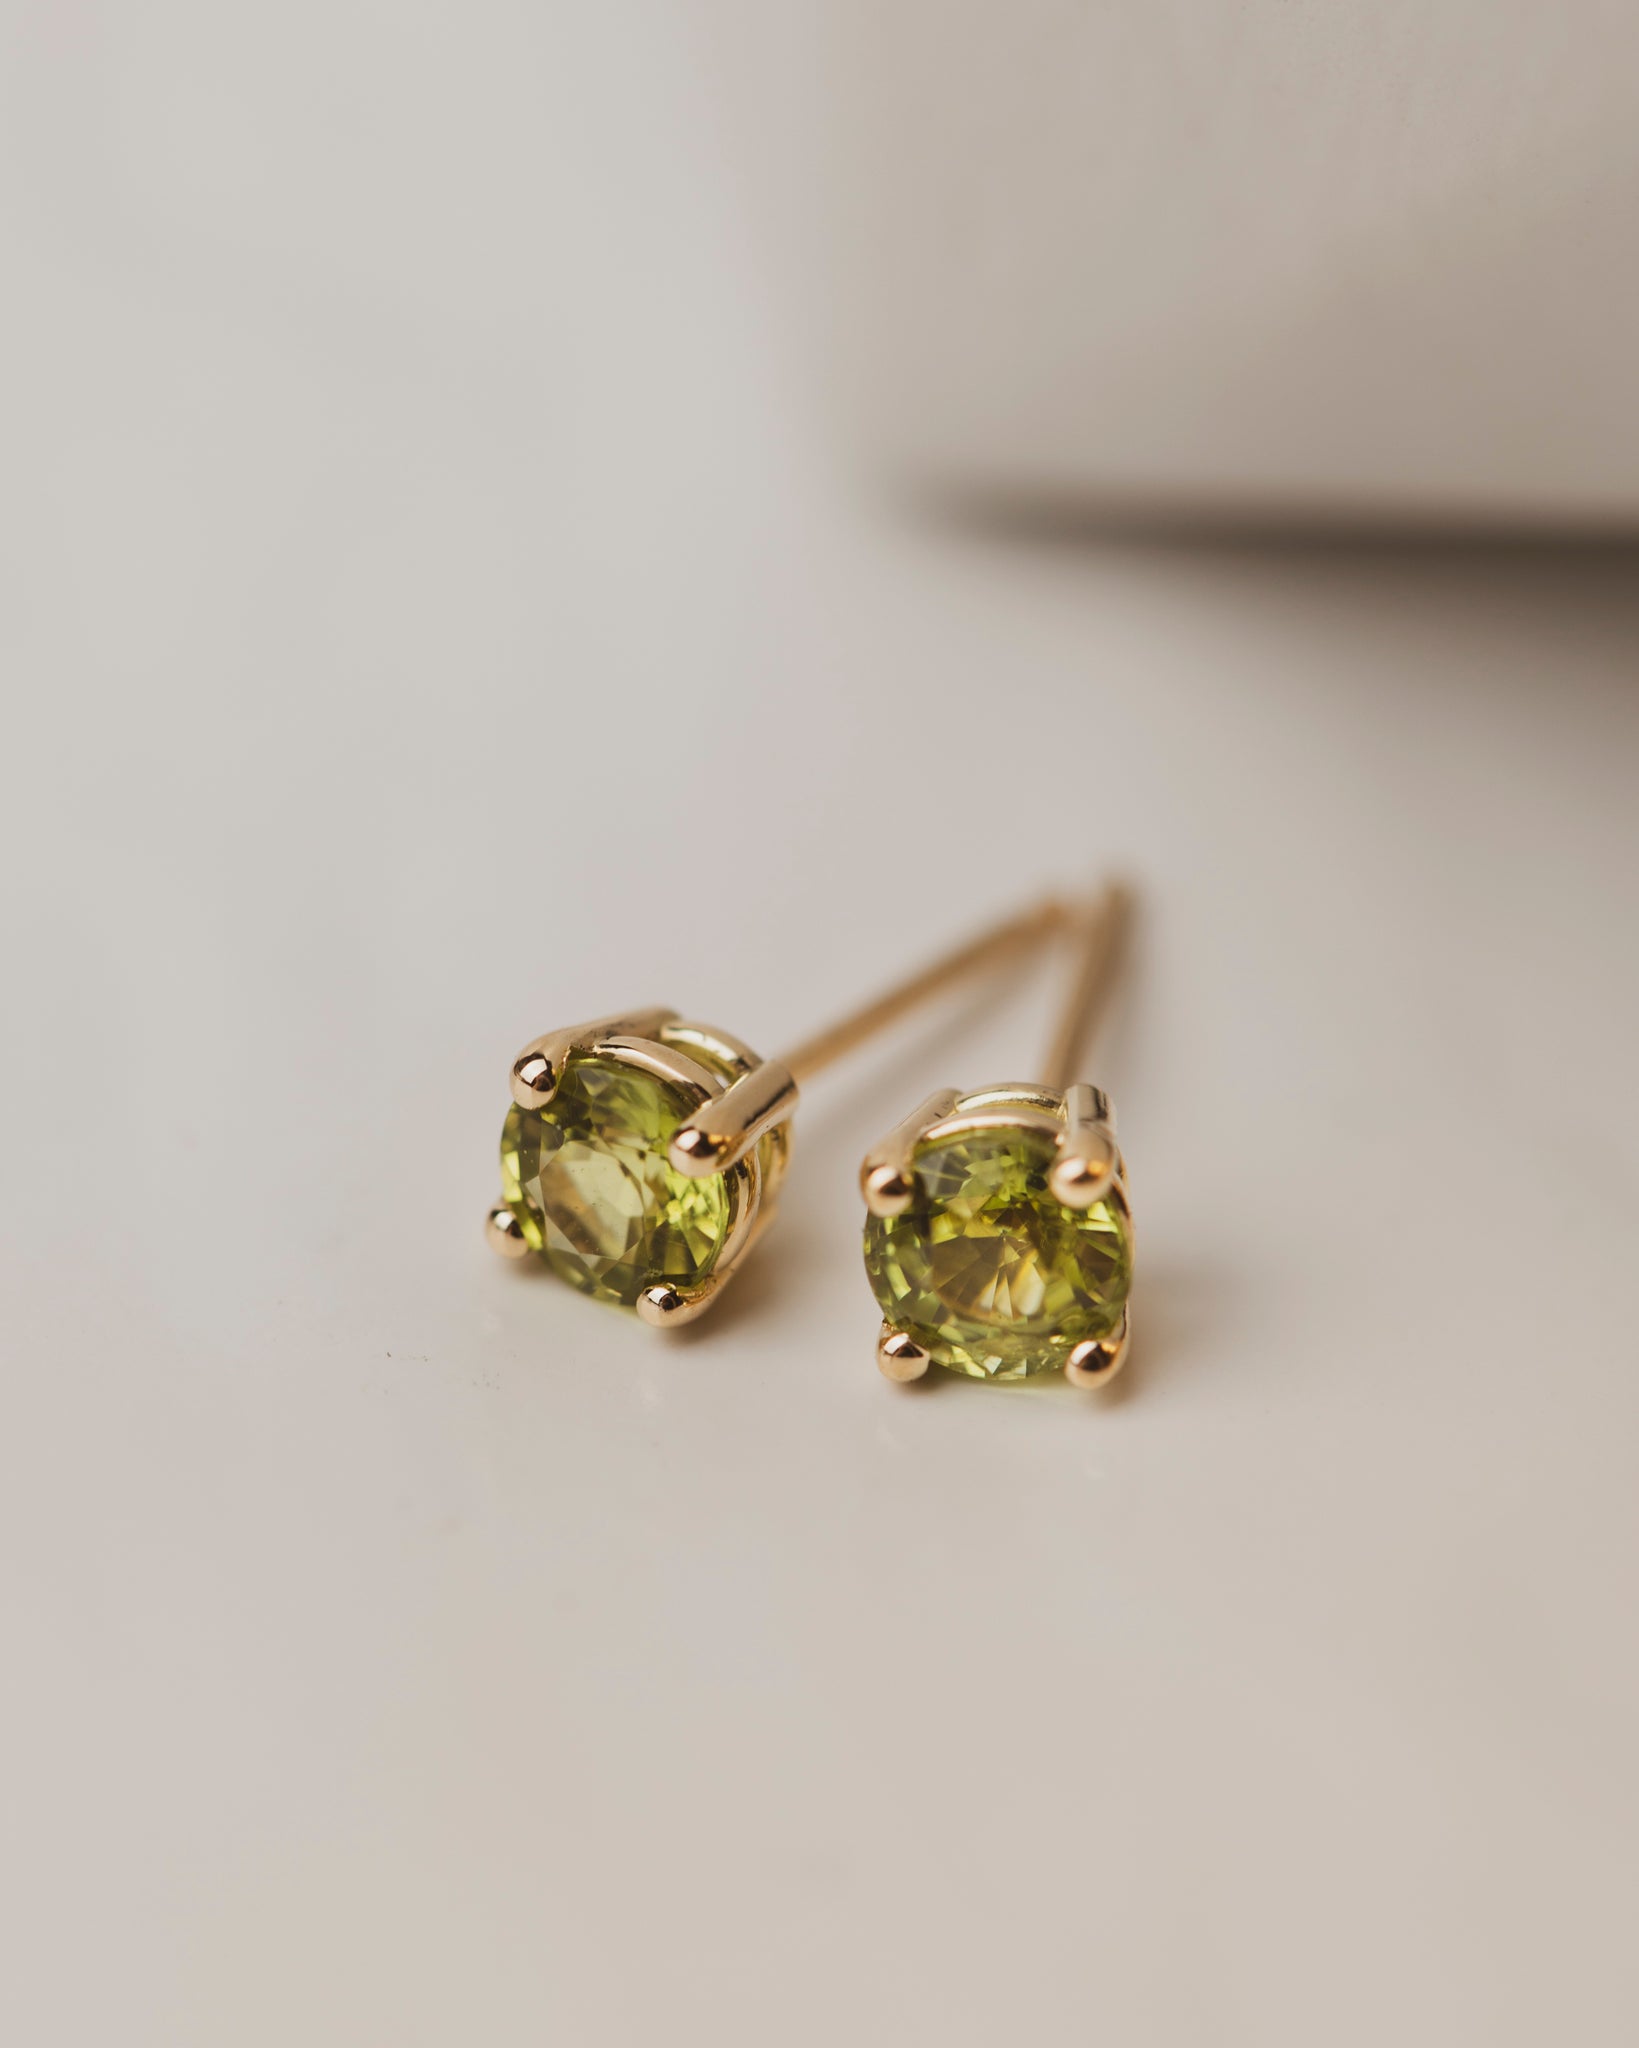 These bright peridot studs bring light and shine in 18K yellow gold. Peridot stones measure 4.5mm - total carat weight: 1.61ct.